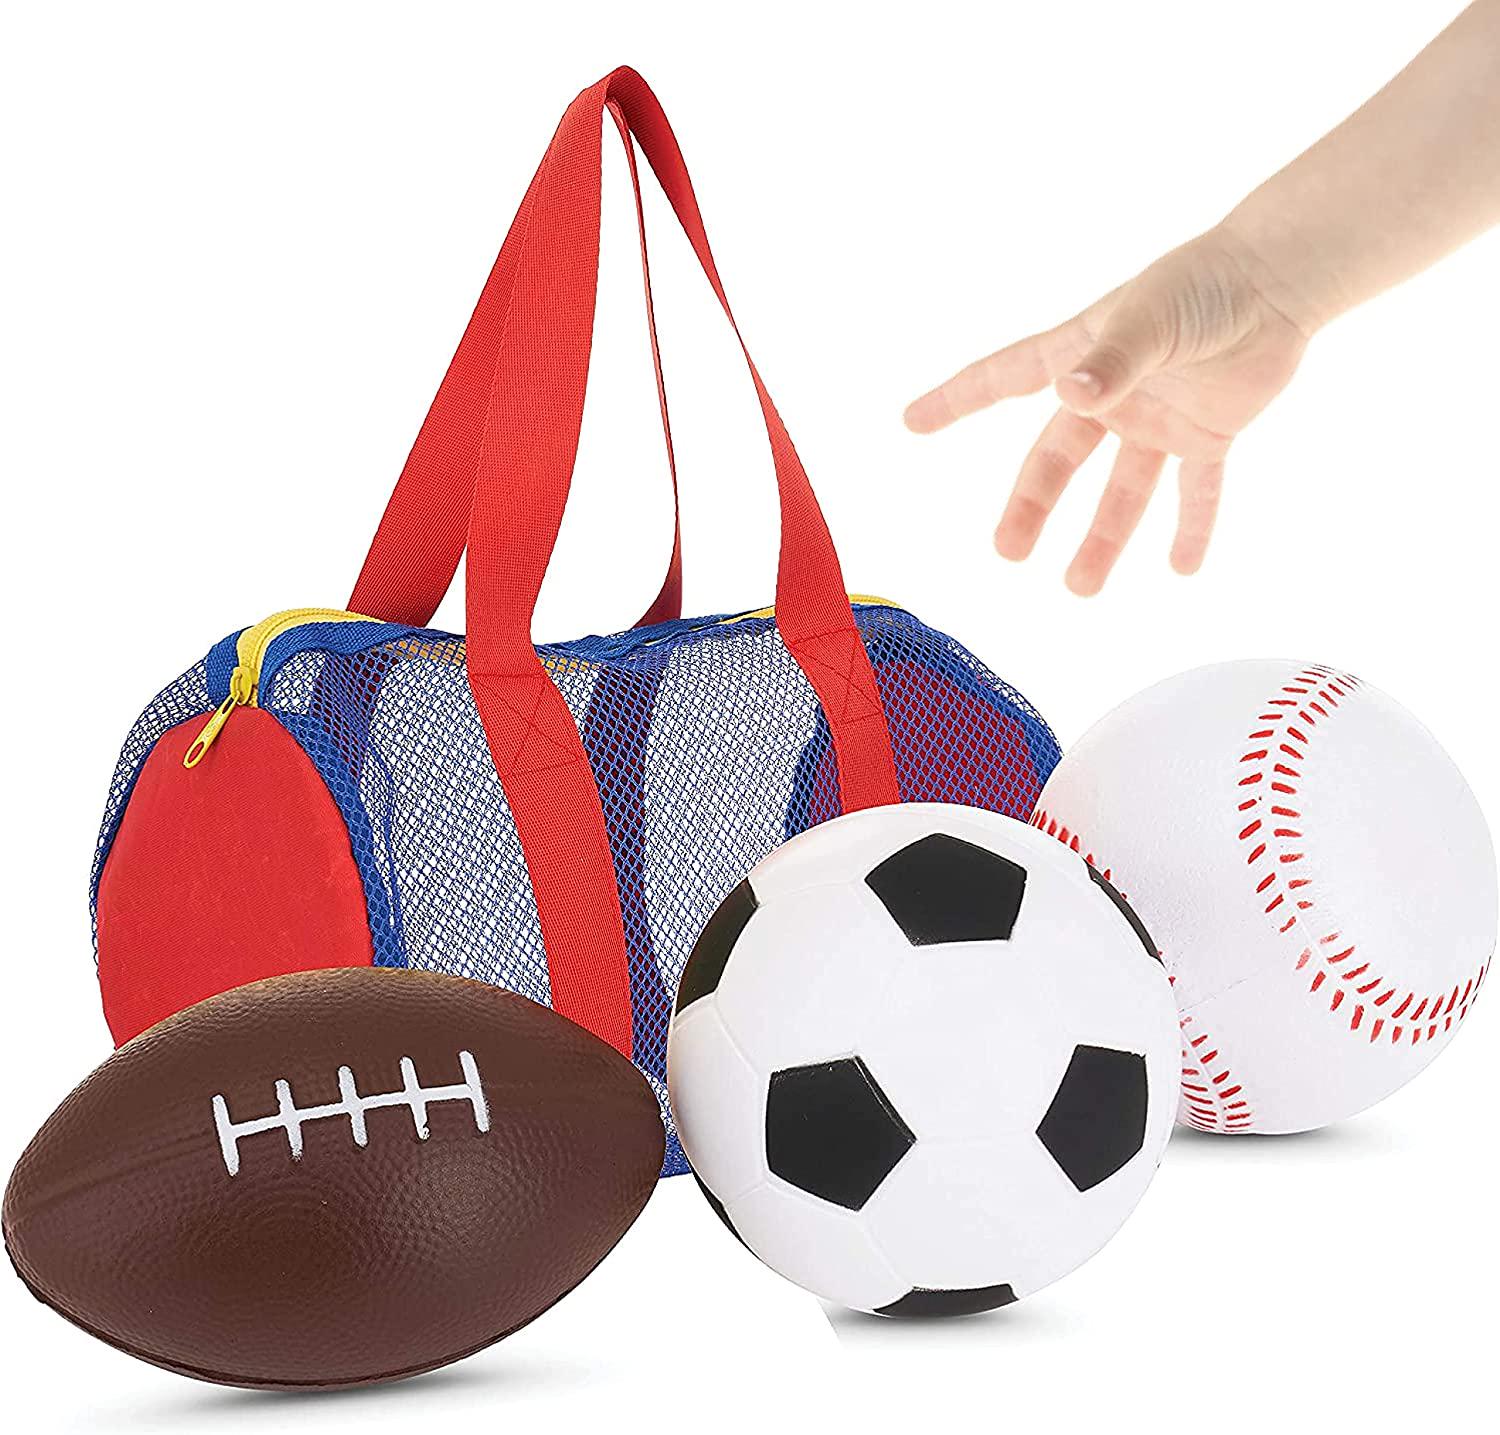 Neliblu, Large Balls for Little Kids - Fun Set of 3 Sports Balls in Convenient Storage and Carry Bag - Includes 5 Baseball, 5 Soccer Ball, 8 Football - Perfect for Outdoor and Indoor Safe Play